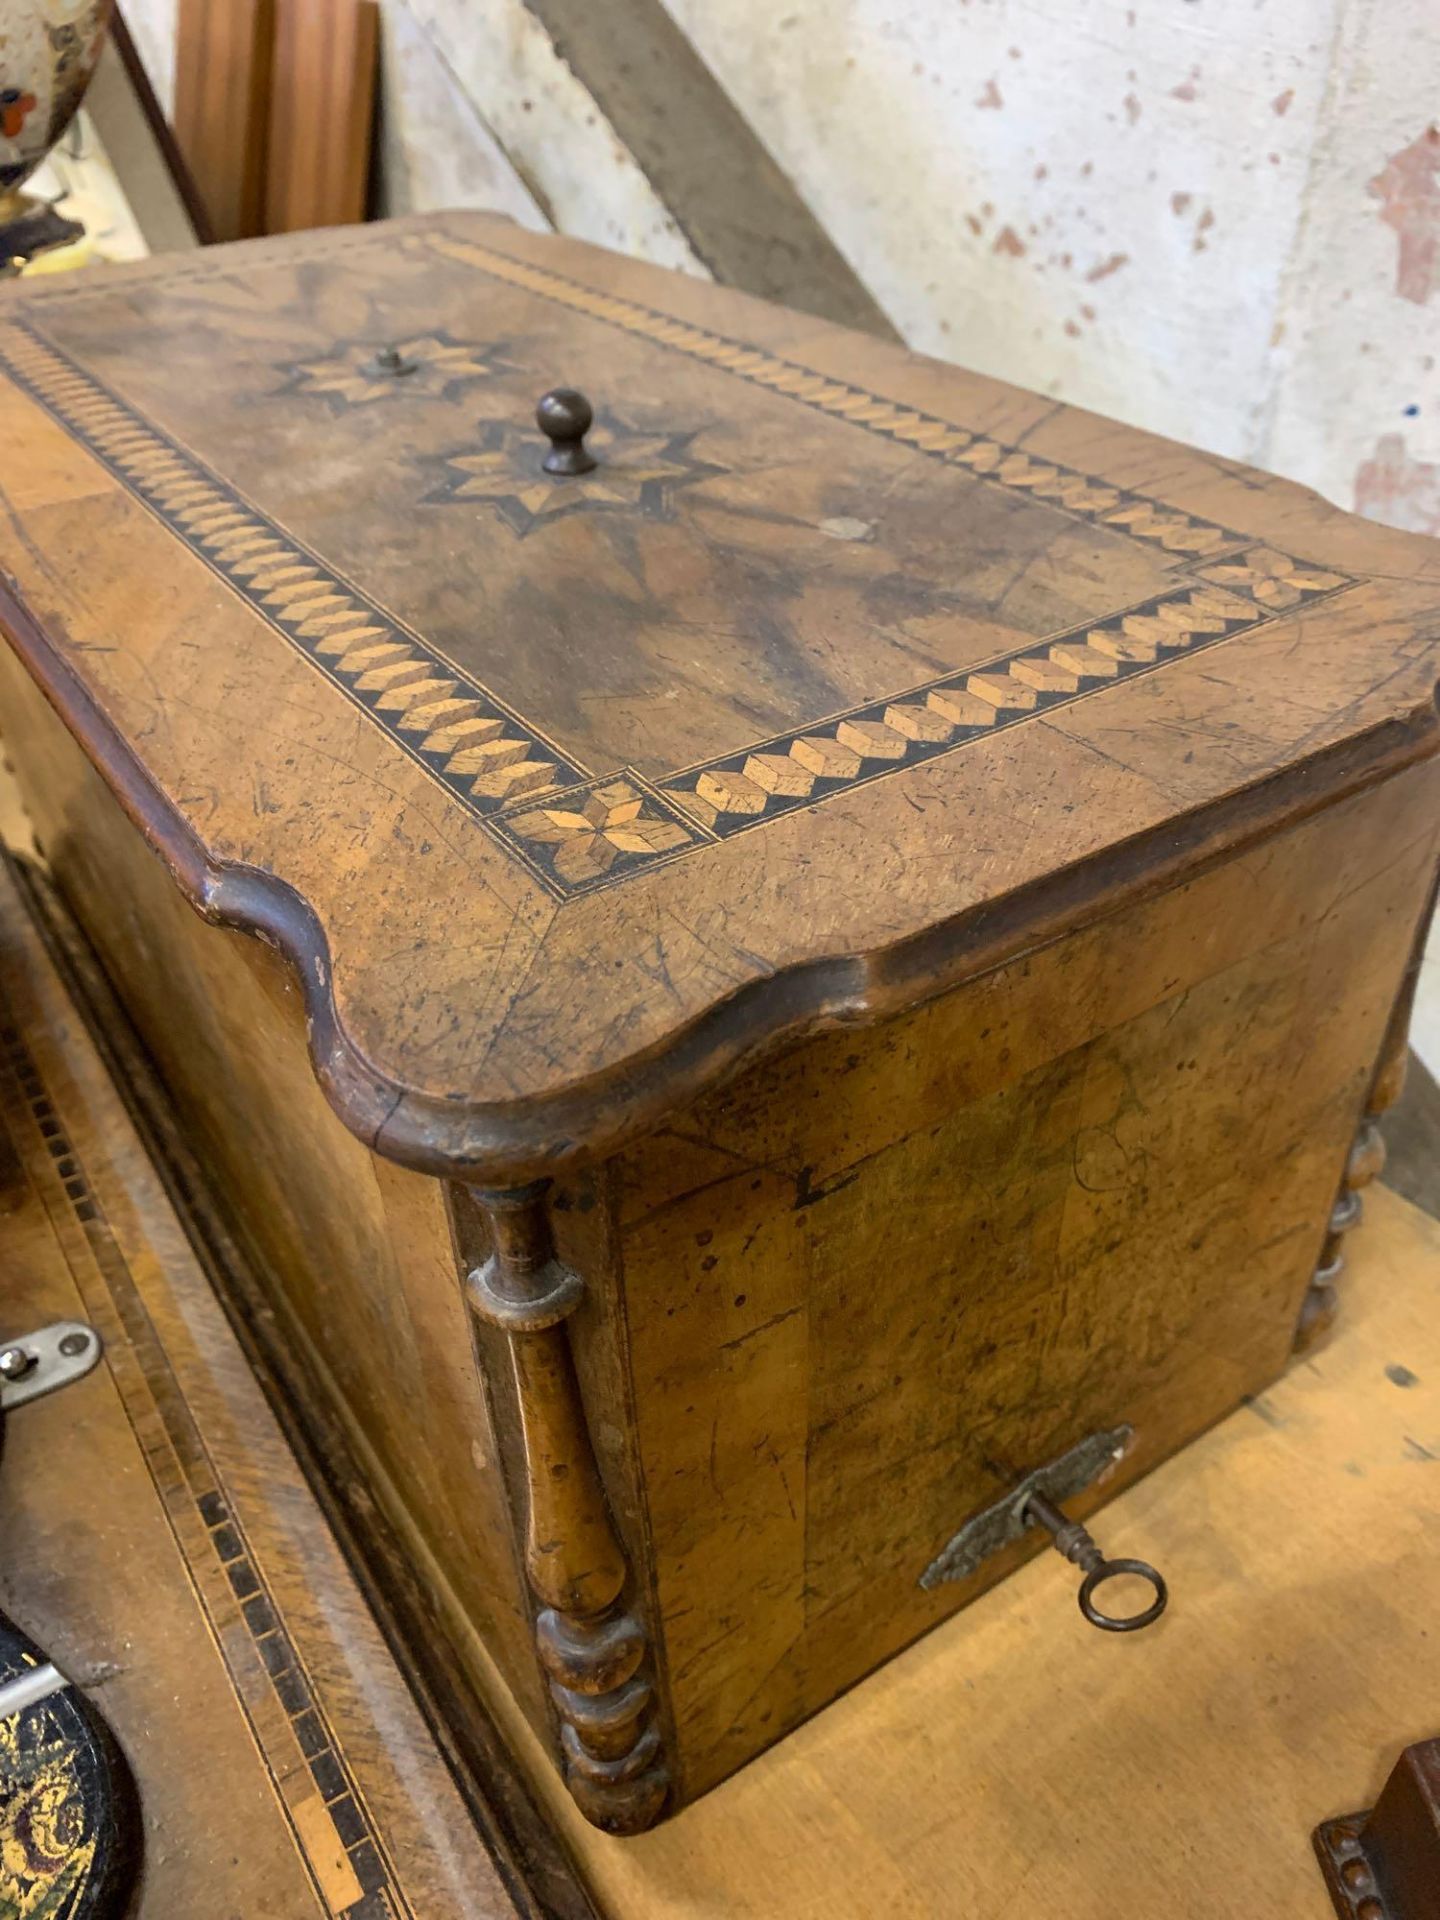 Manual sewing machine in walnut box decorated with parquetry - Image 6 of 6